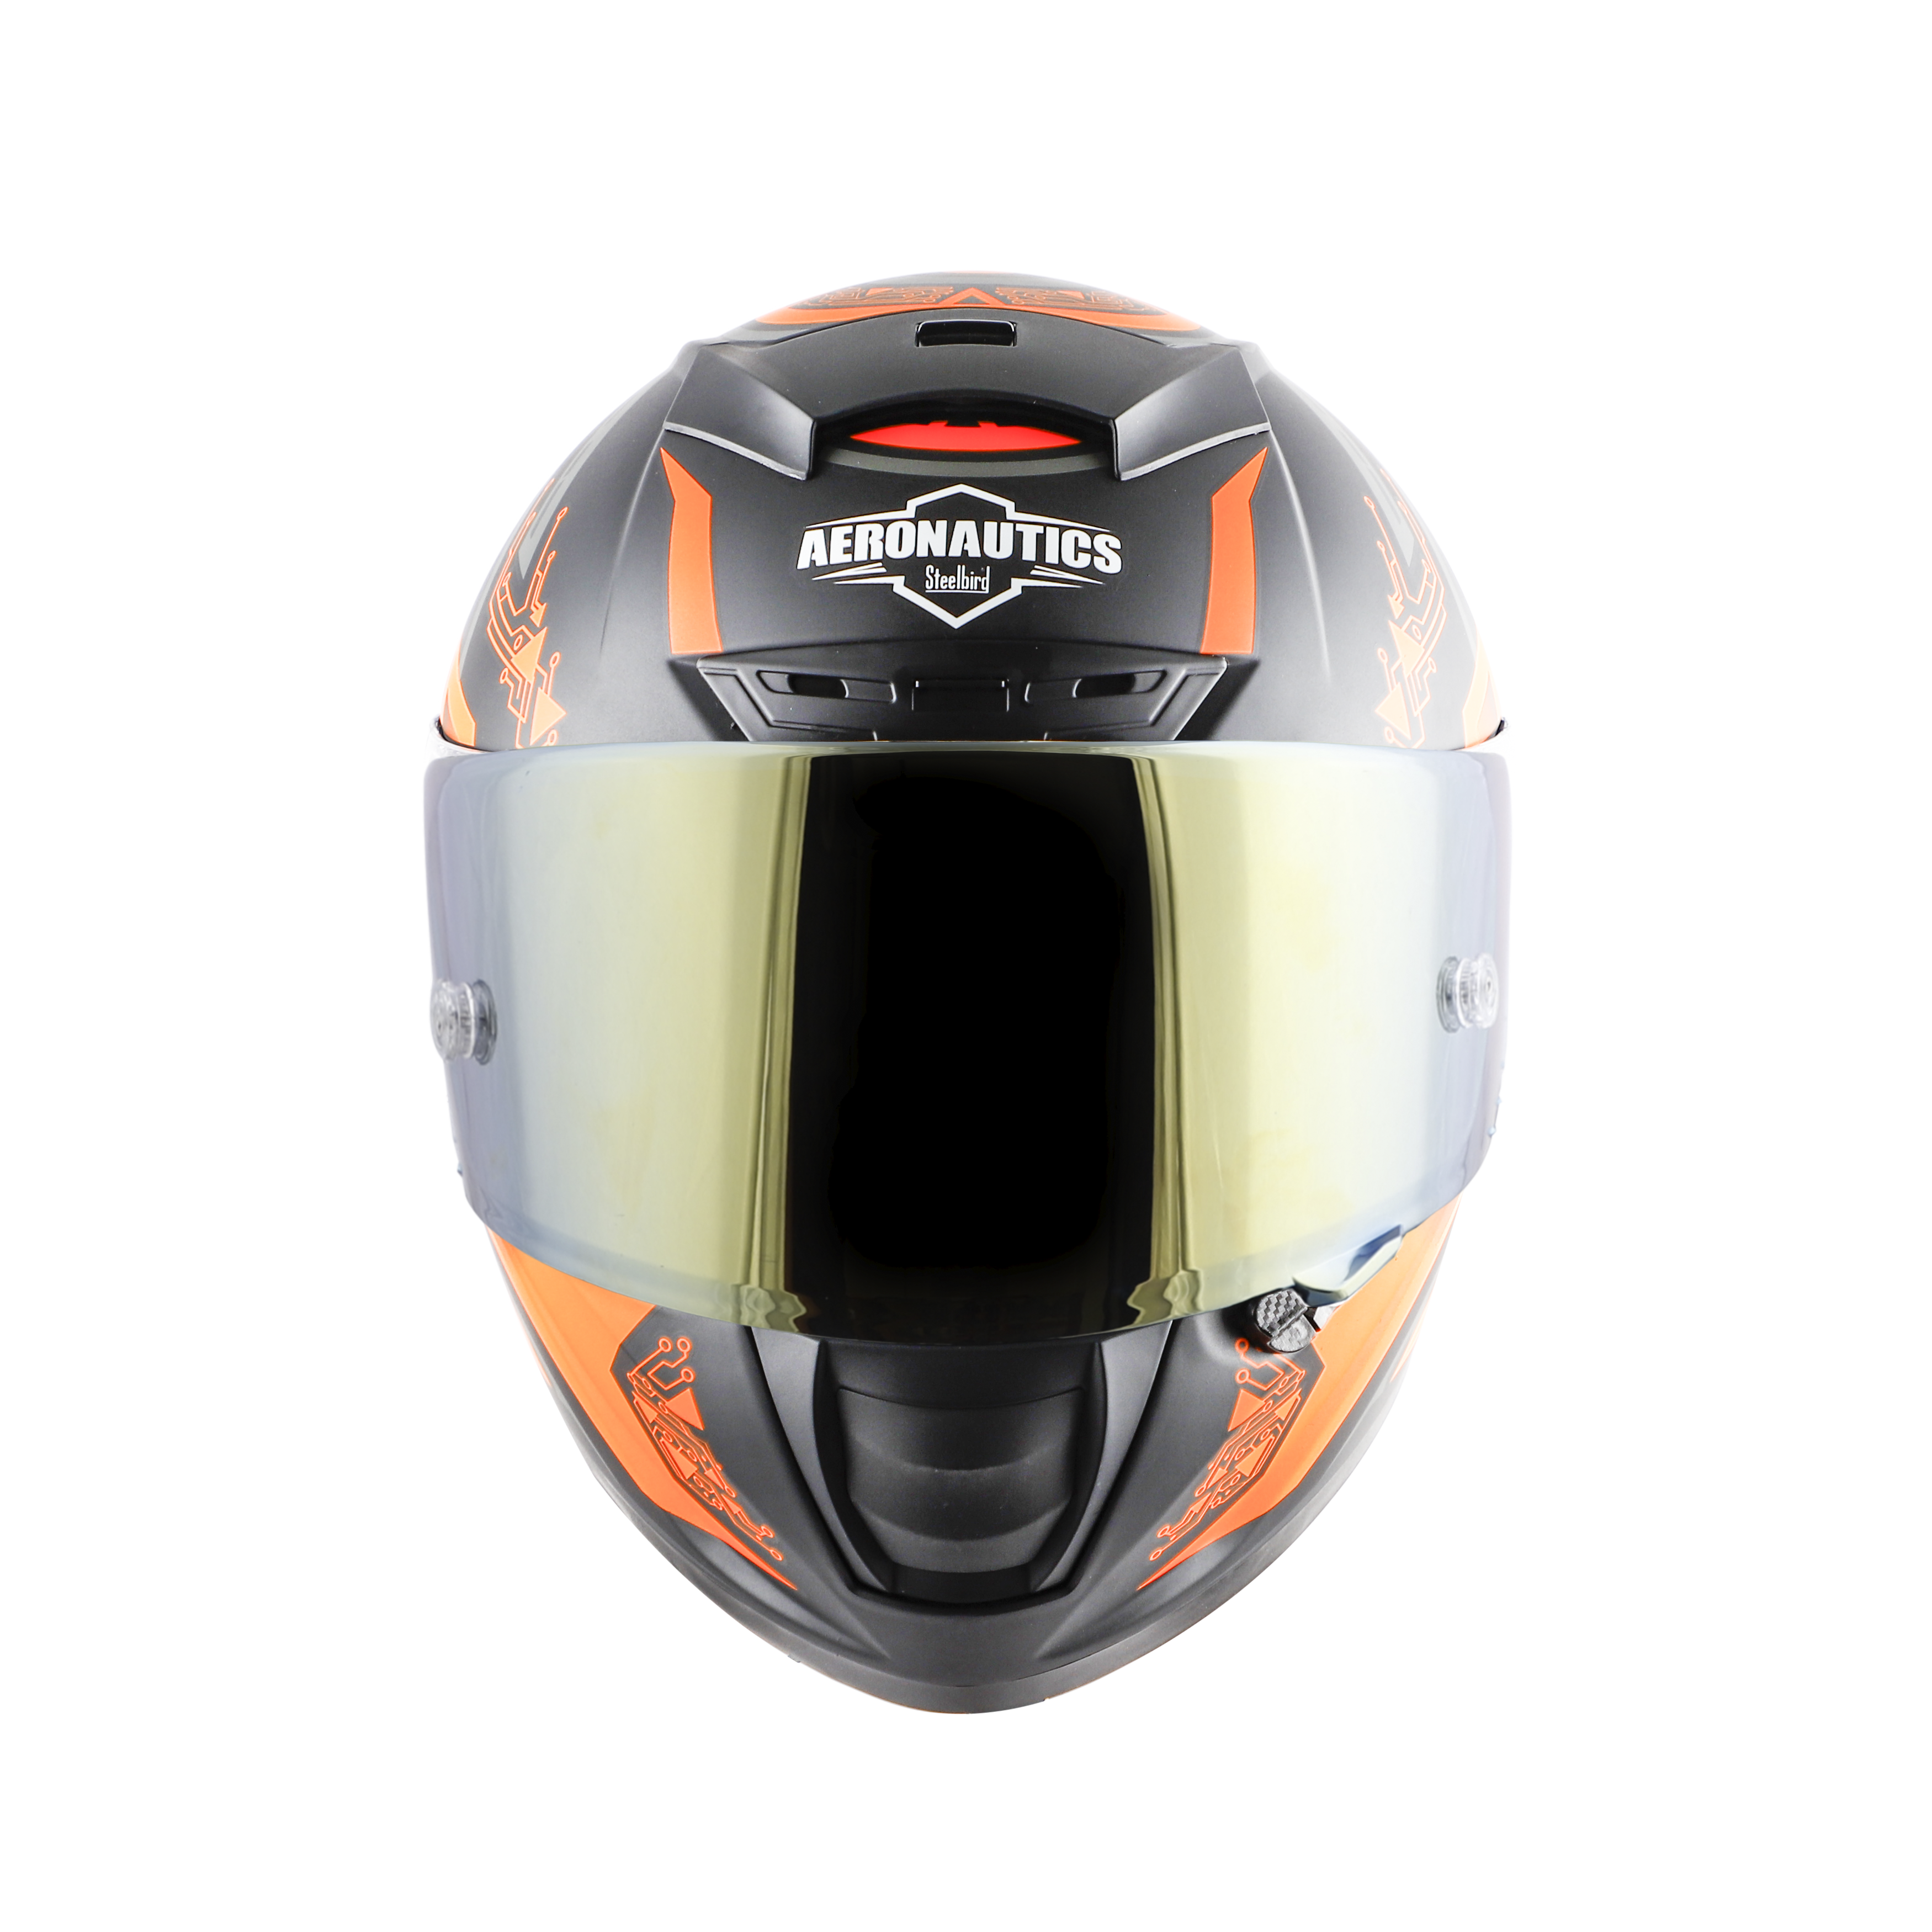 SA-2 ELECTRIC MAT BLACK WITH ORANGE (FITTED WITH CLEAR VISOR EXTRA GOLD CHROME VISOR FREE WITH ANTI-FOG SHIELD HOLDER)